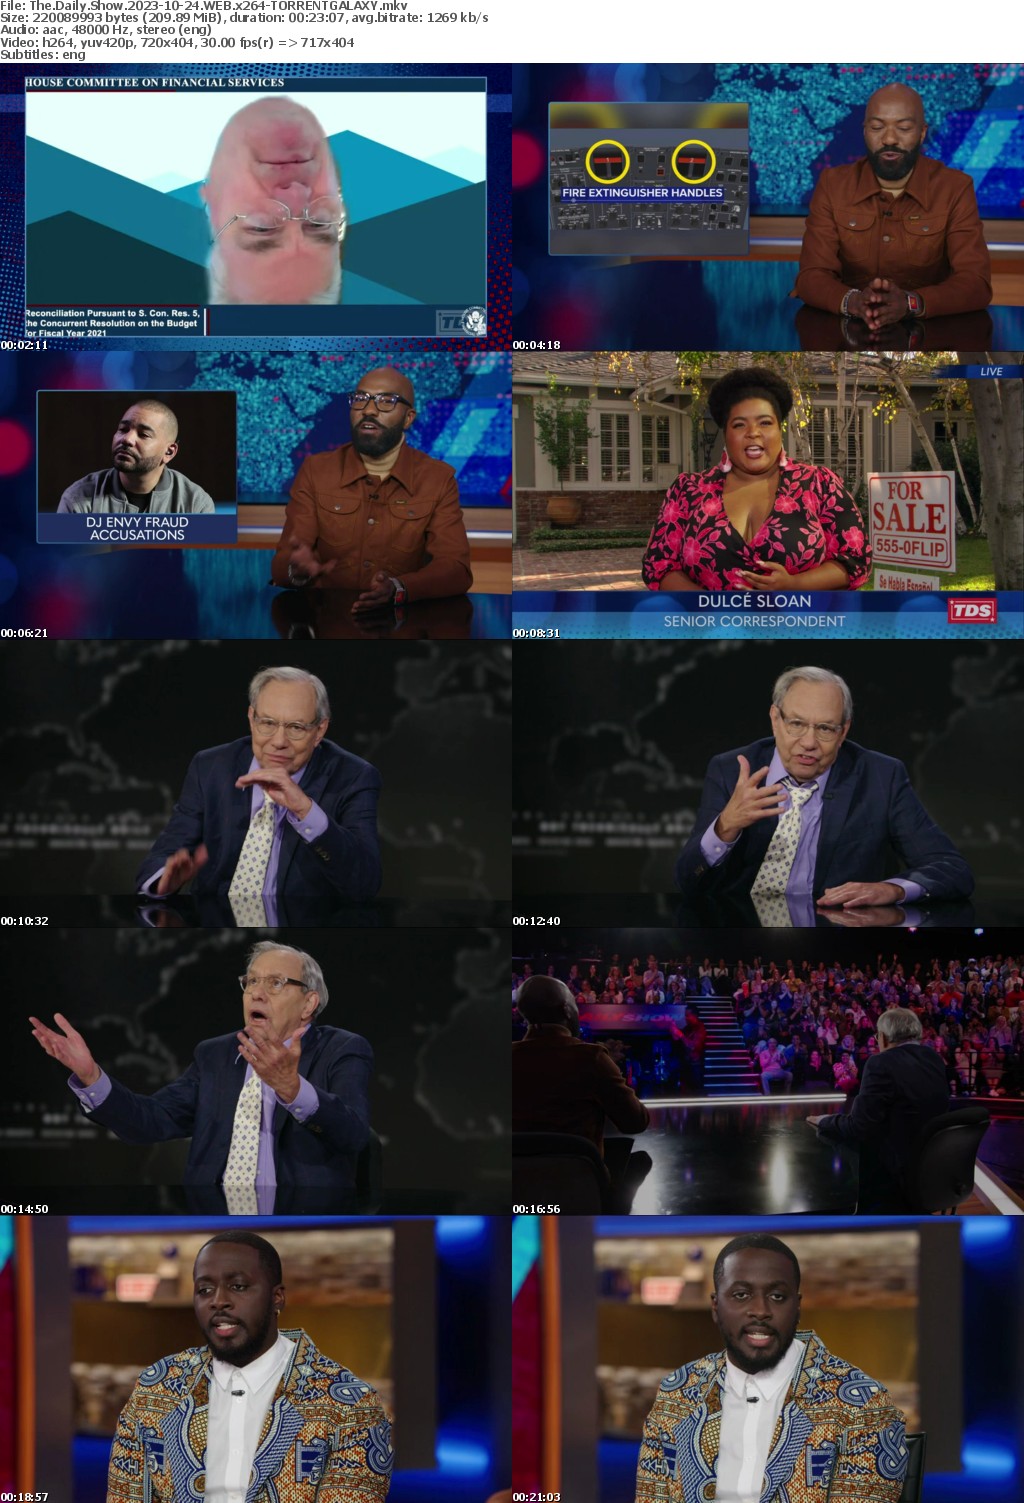 The Daily Show 2023-10-24 WEB x264-GALAXY